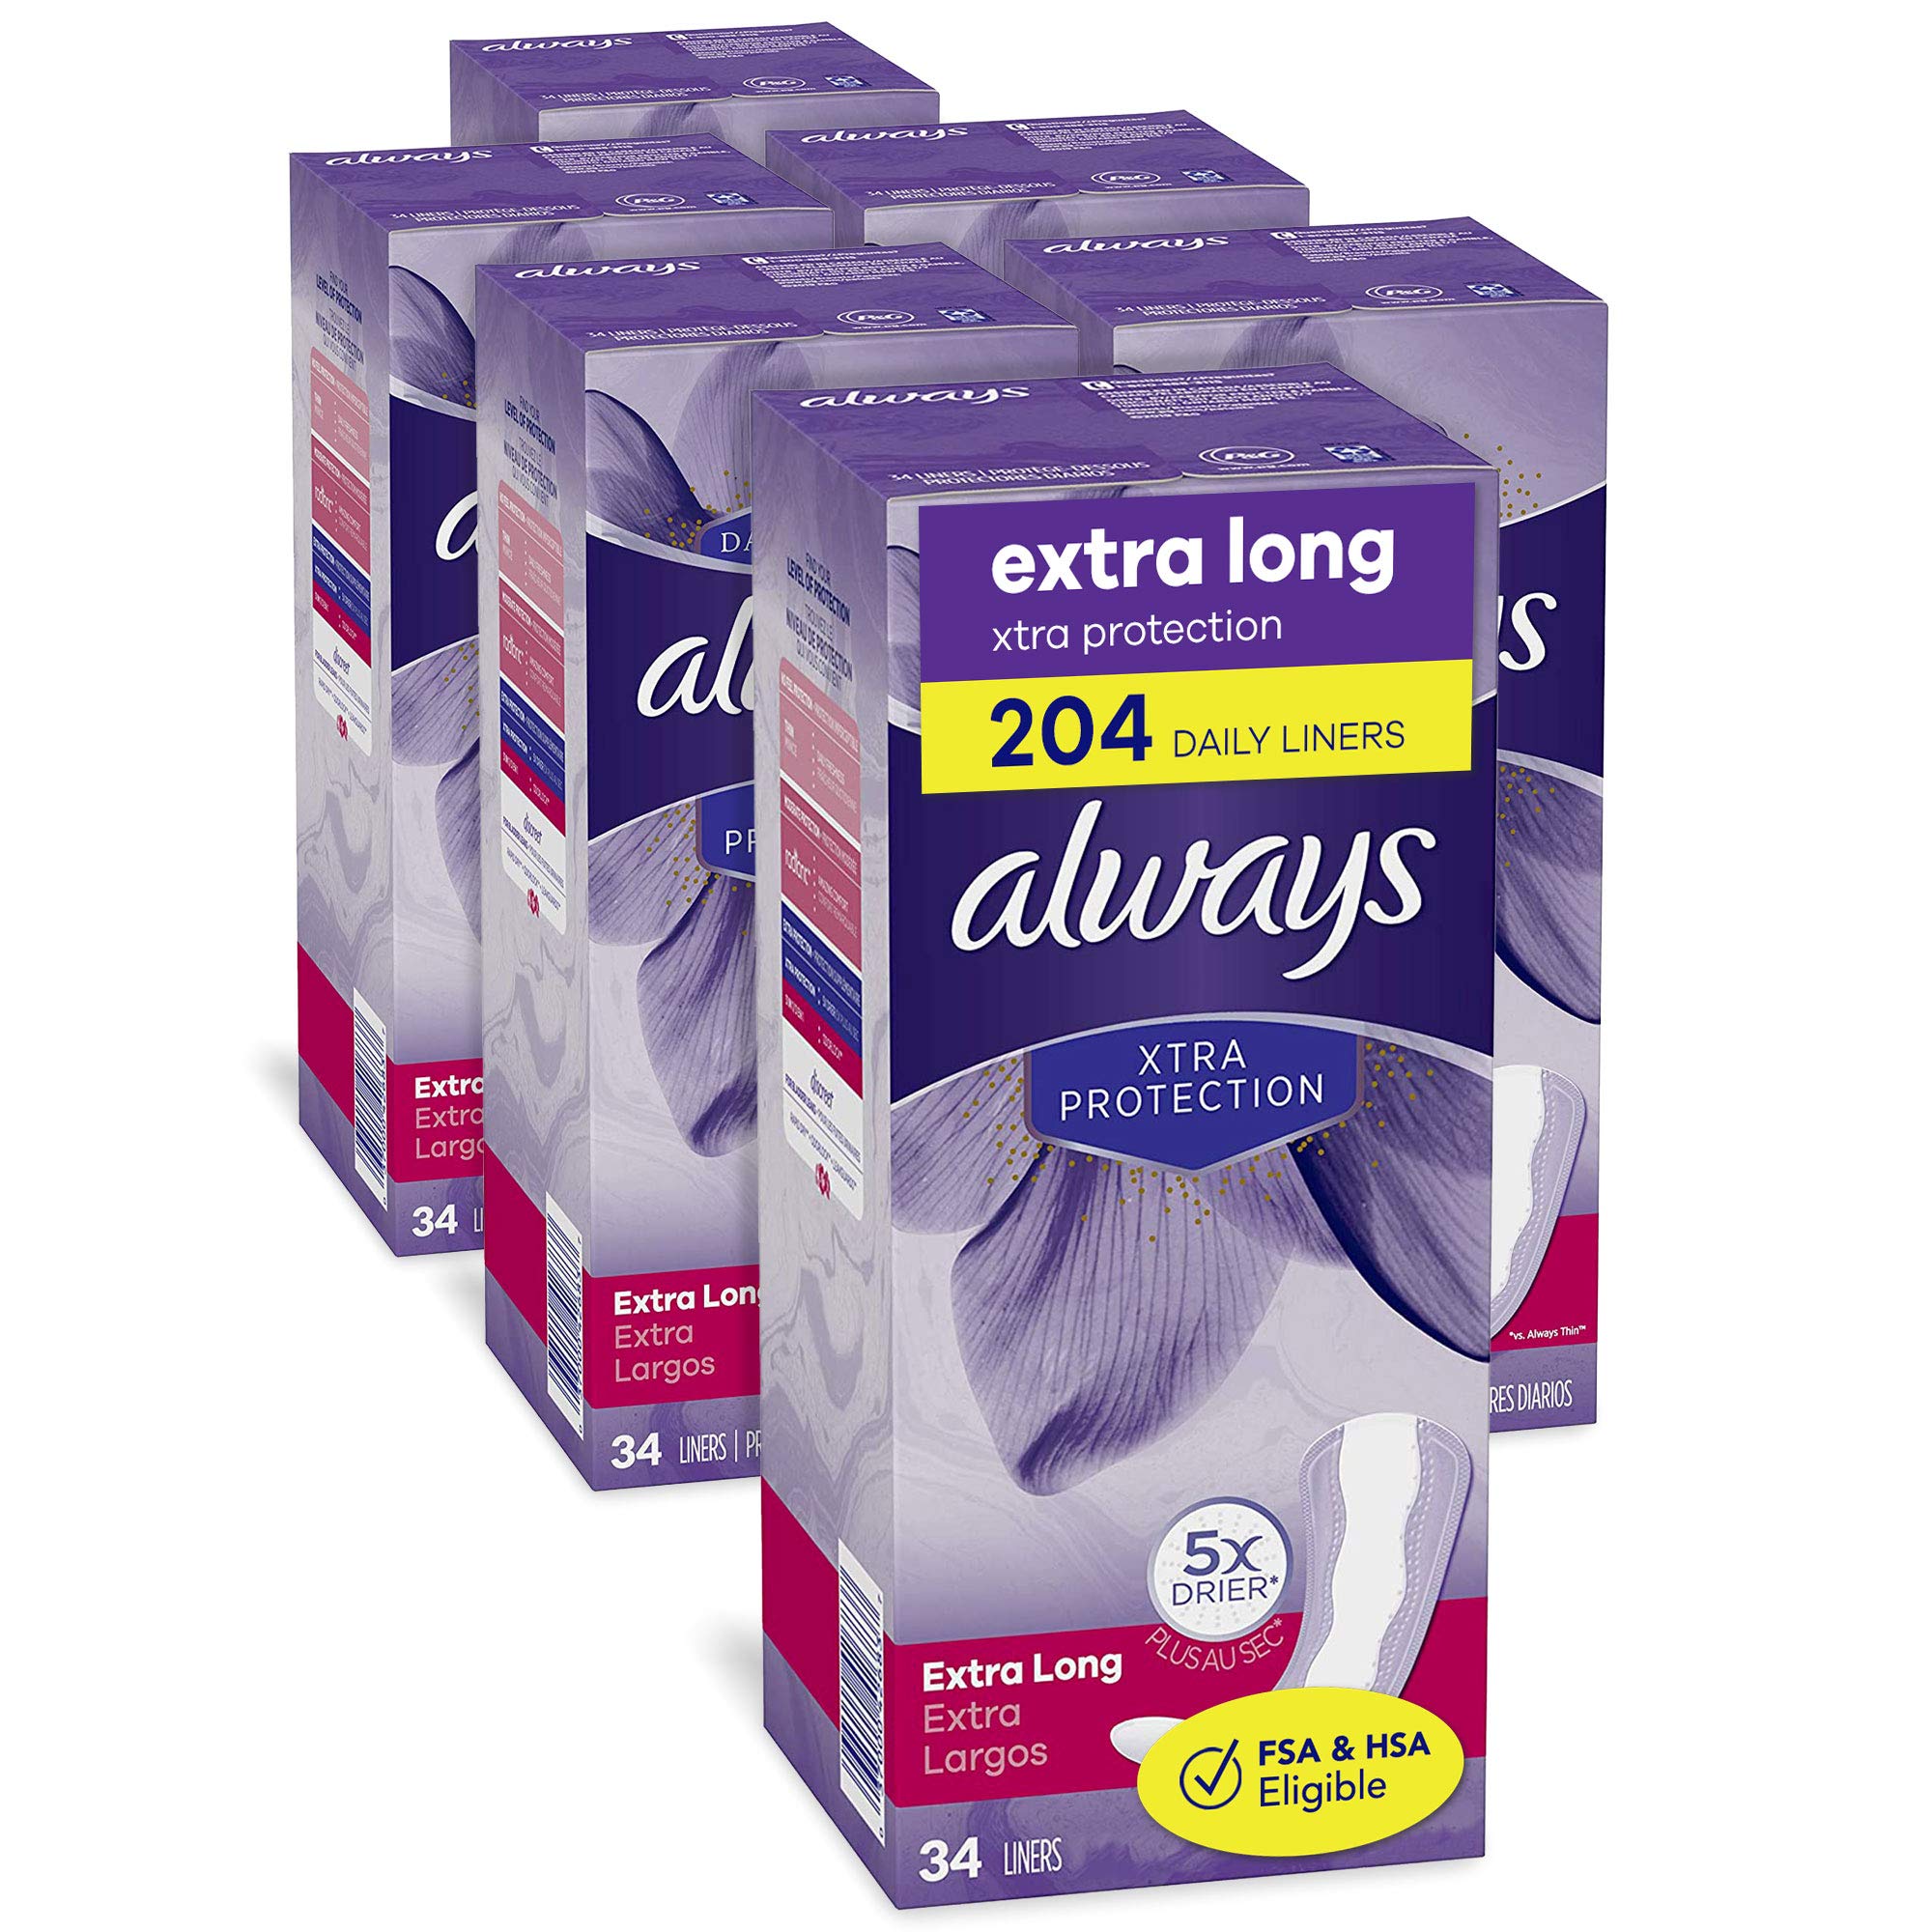 Always Anti-Bunch Xtra Protection, Panty Liners For Women, Light  Absorbency, Long Length, Leakguard + Rapiddry, Unsented, 80 Count